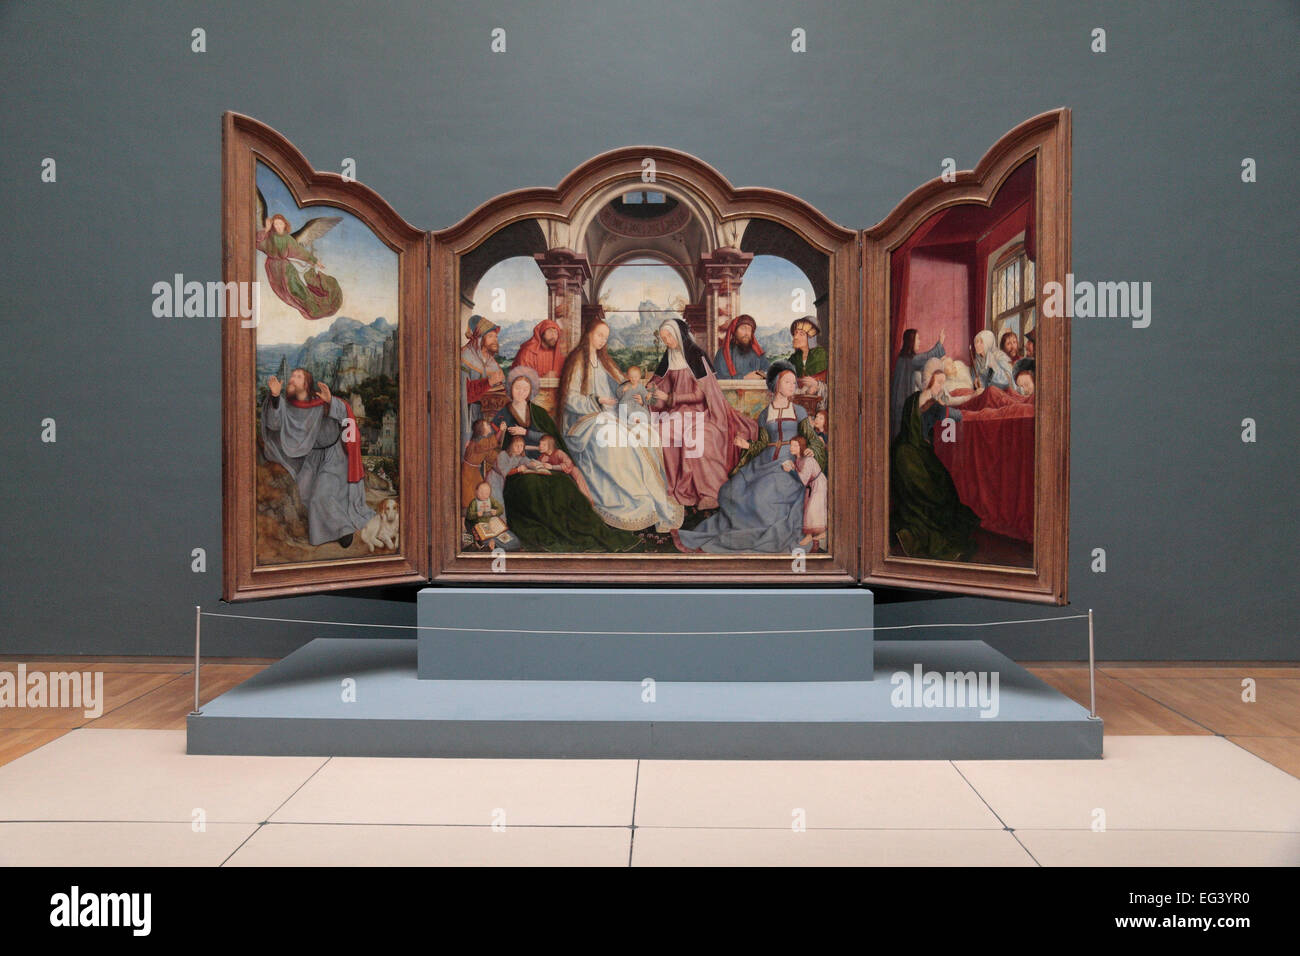 The family of St Anna by Quentin Matsys on display in the Royal Museums of Fine Arts of Belgium, Brussels, Belgium. Stock Photo